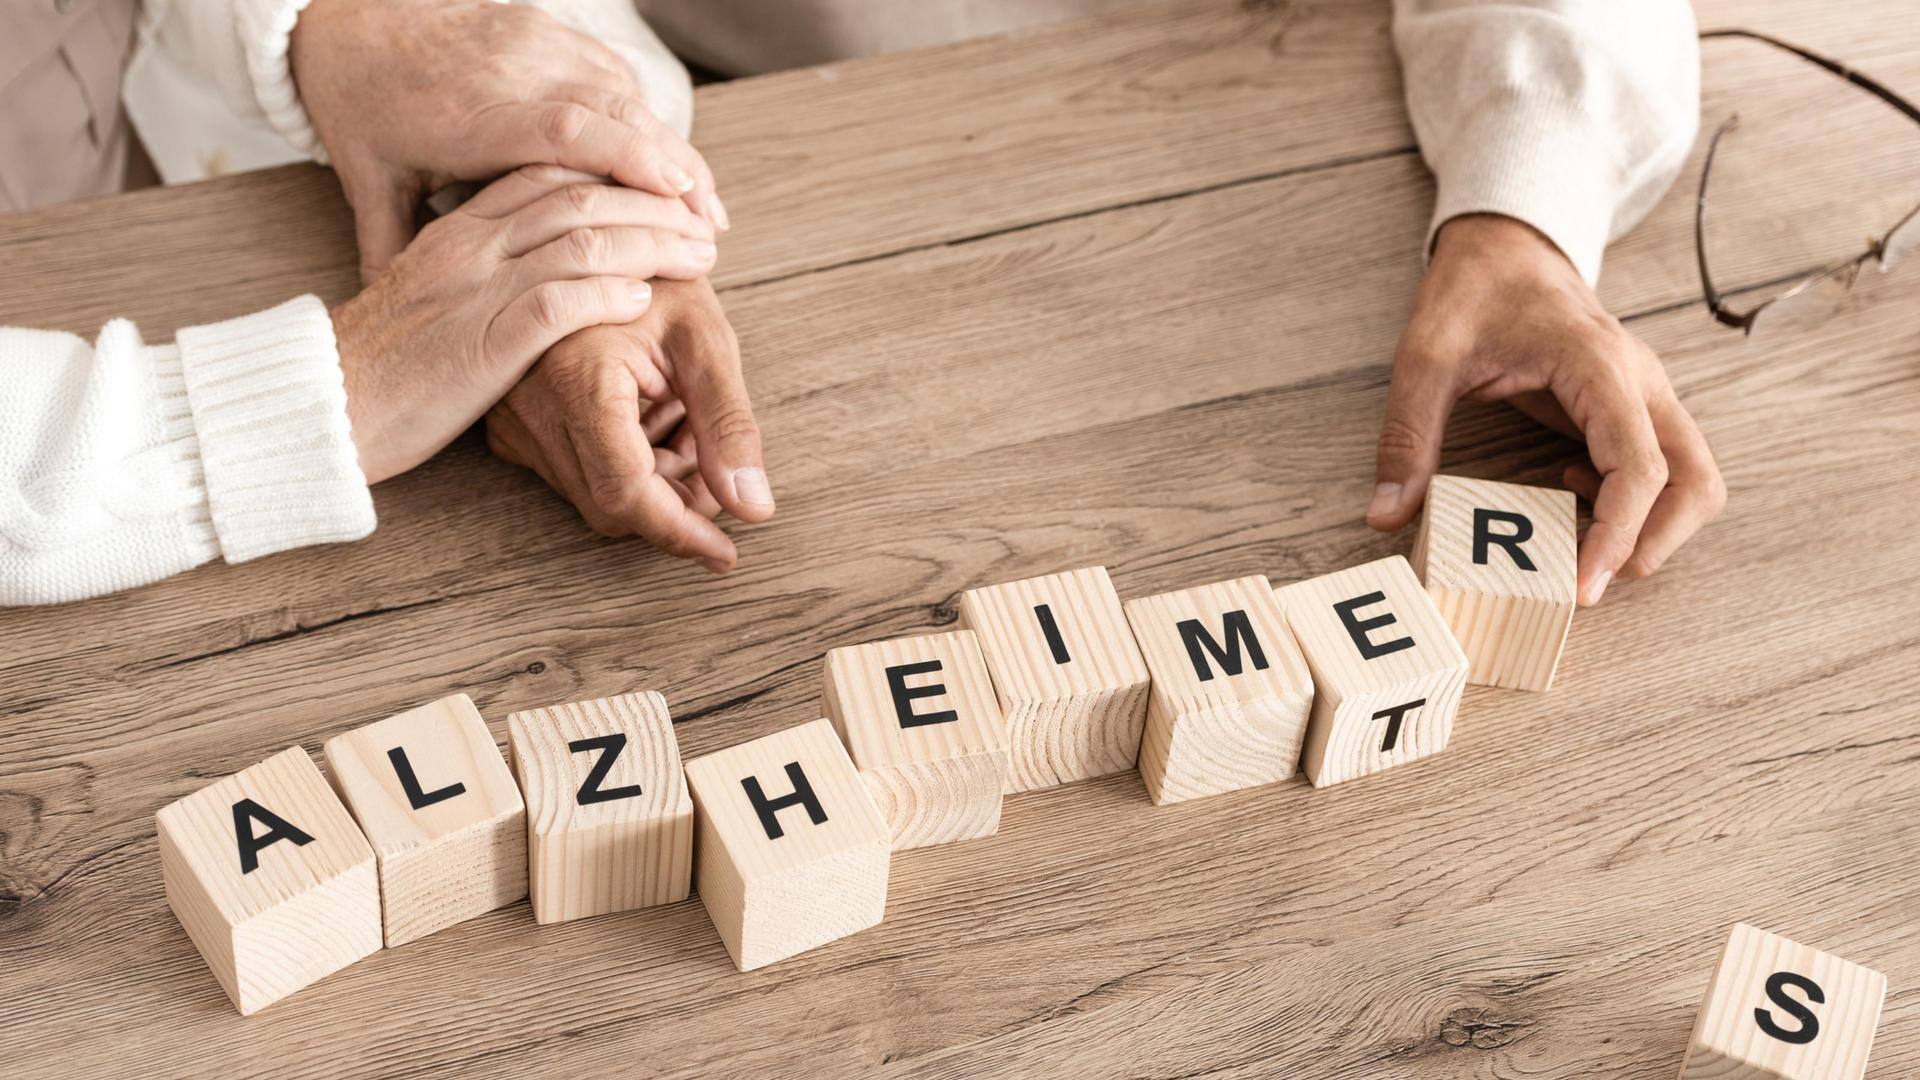 How to effectively communicate with individuals living with Alzheimer's 